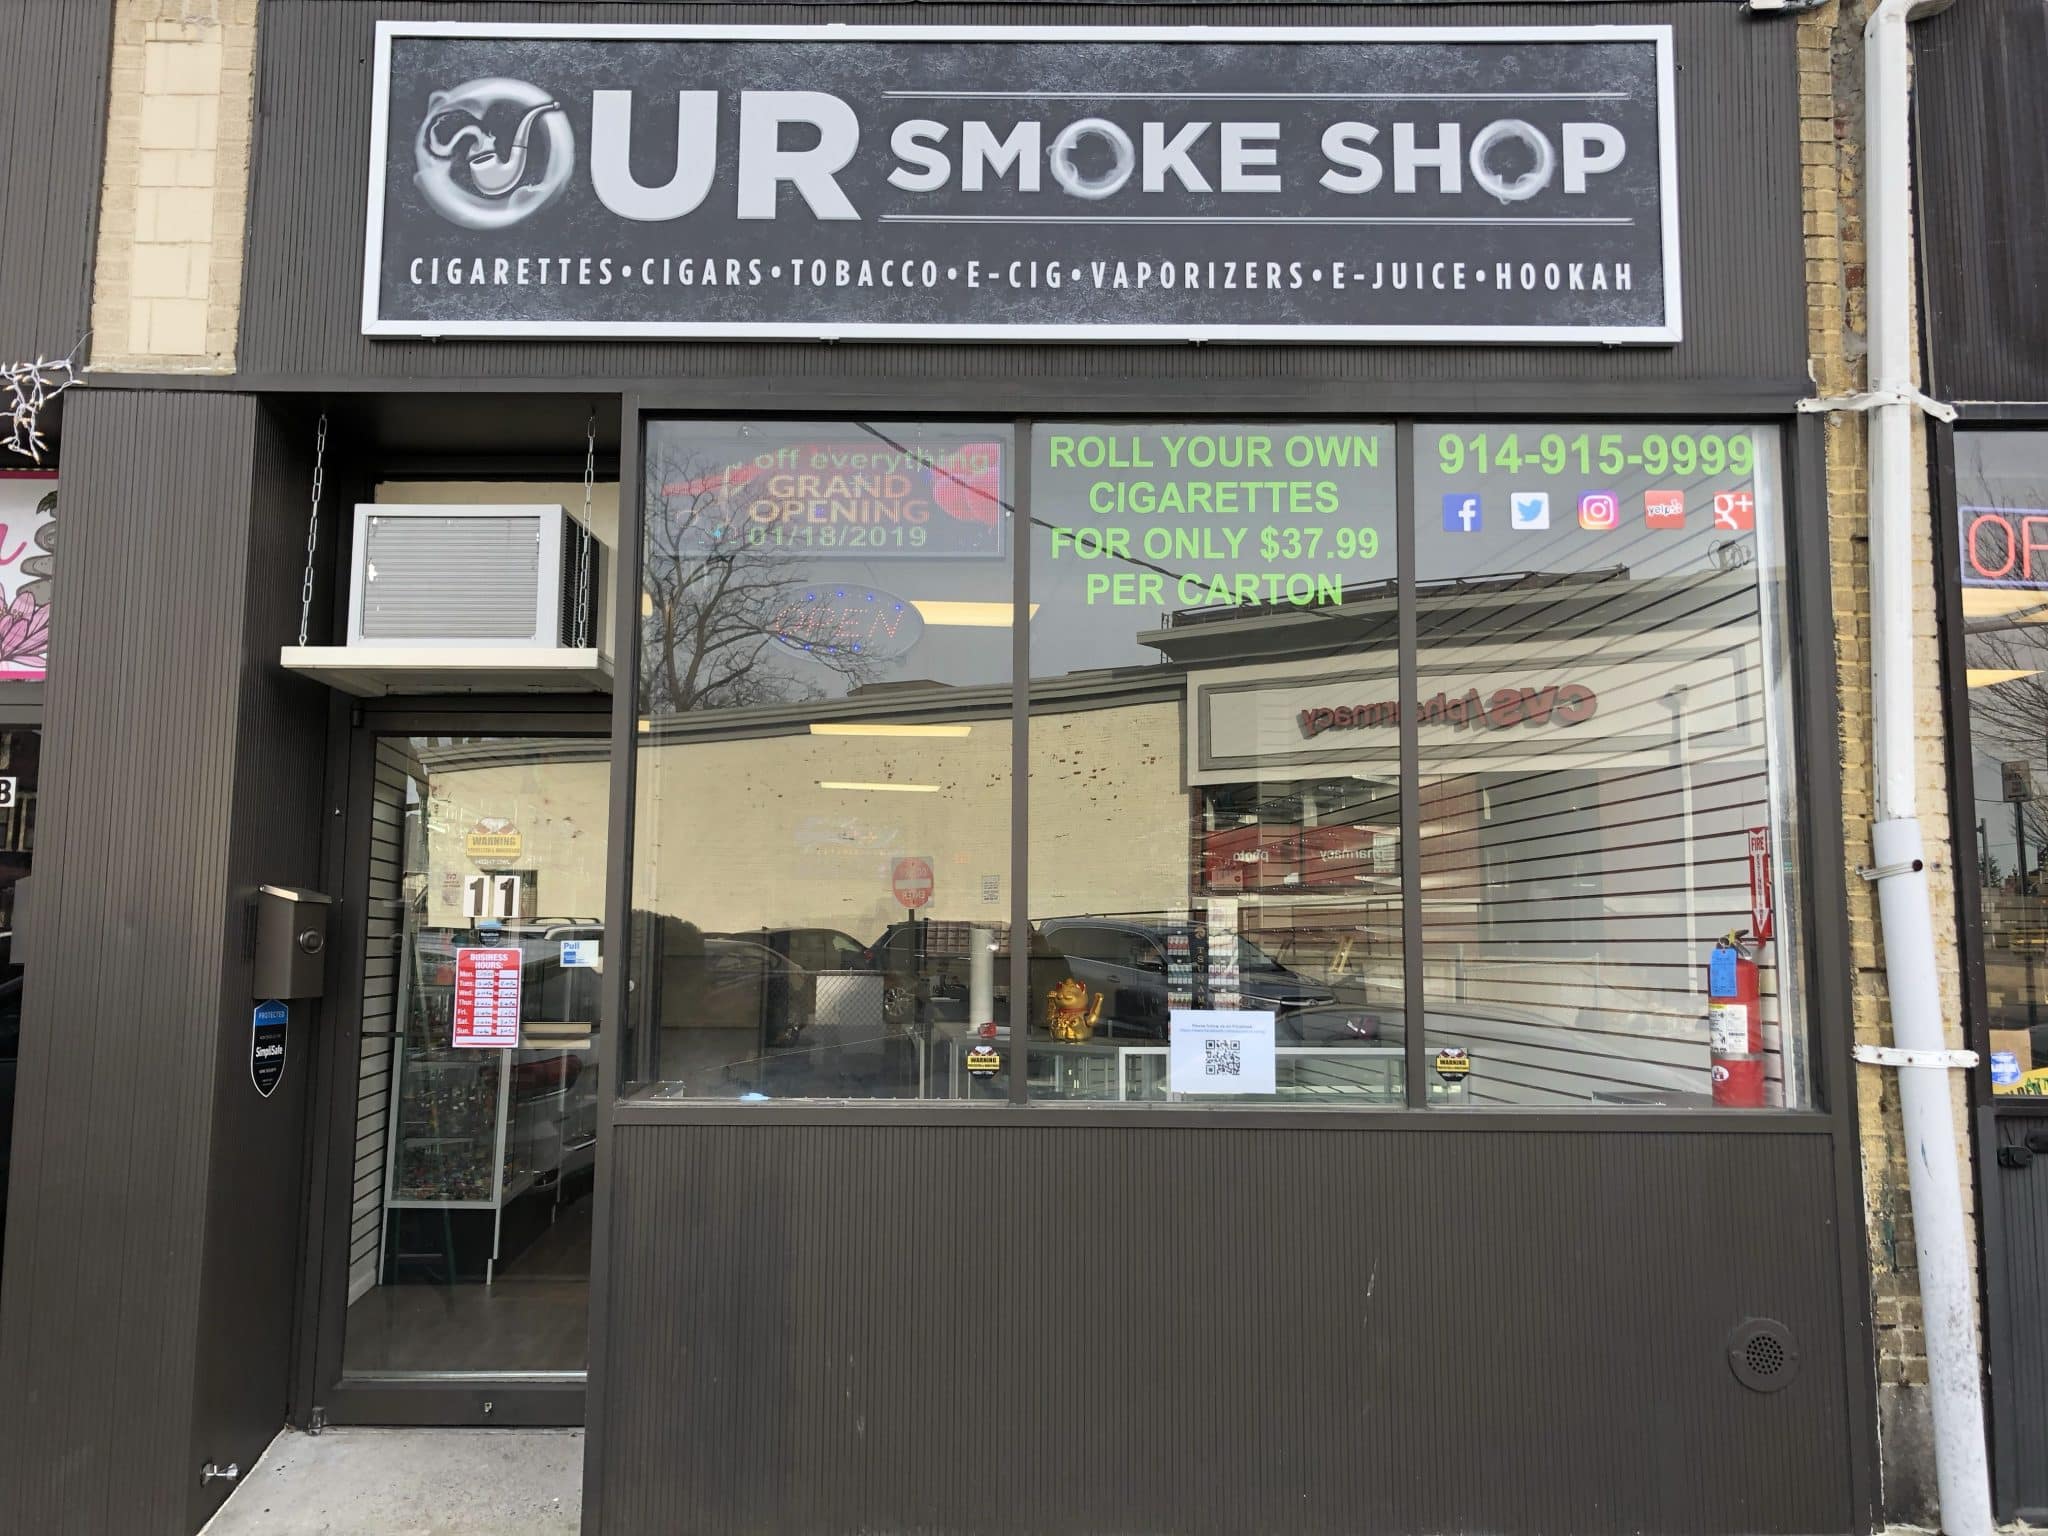 Our Smoke Shop, 11 Treno St, New Rochelle, NY 10801, United States